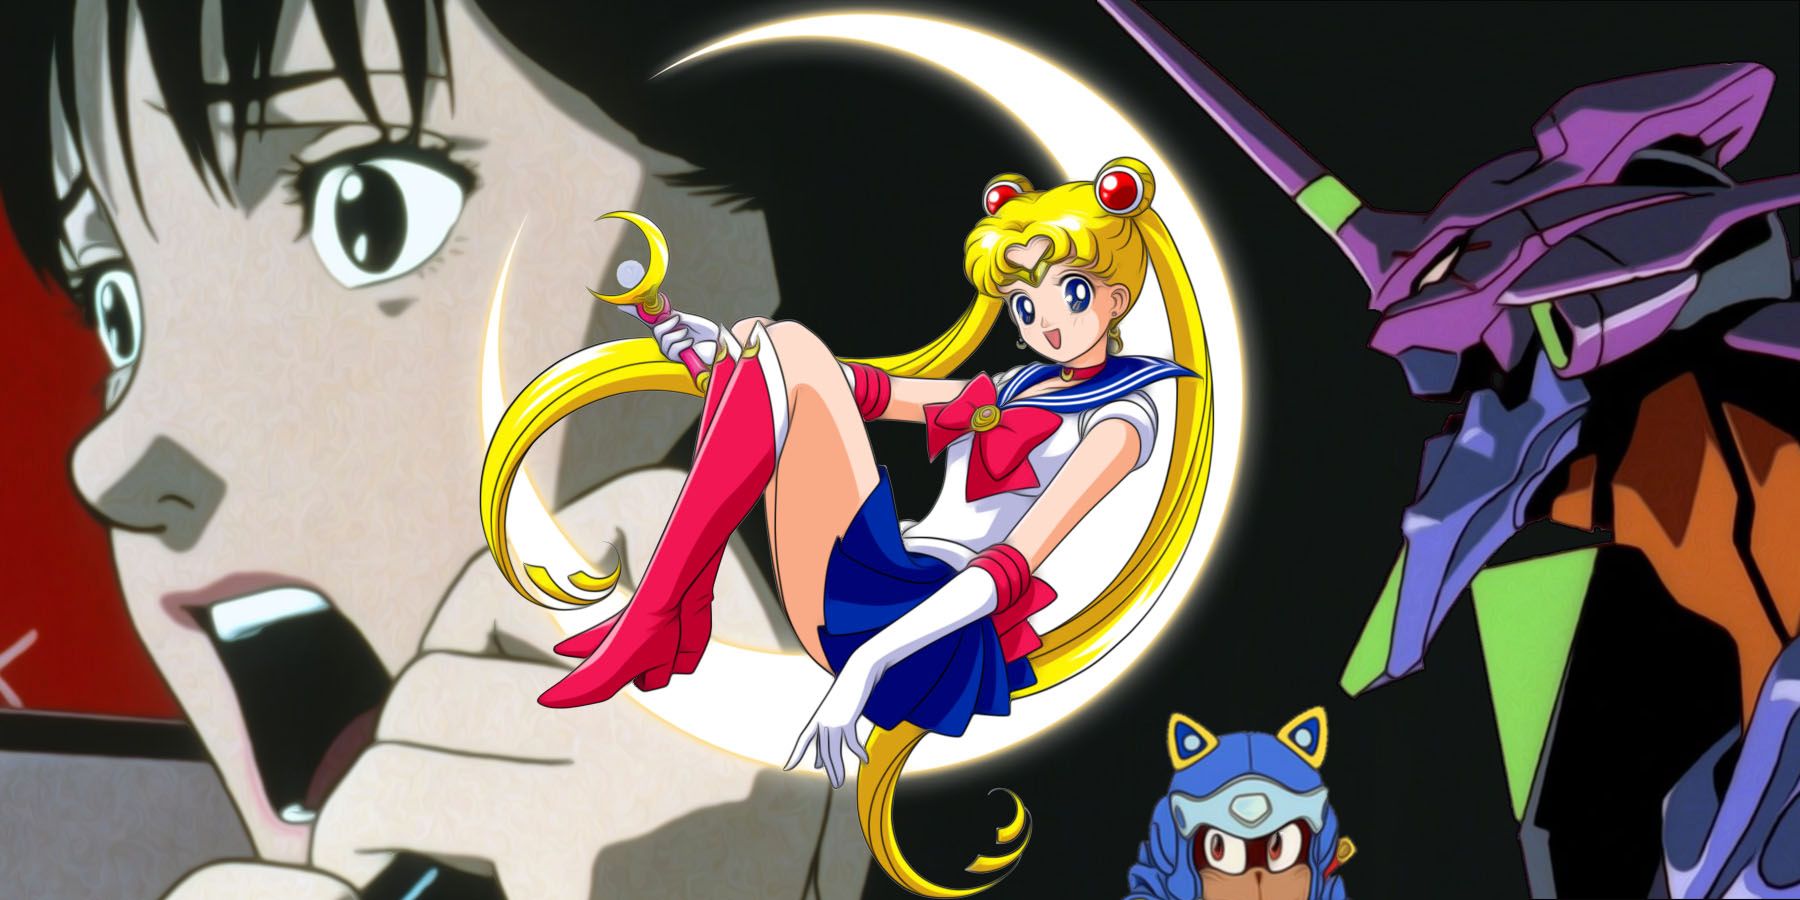 80sanime — 1979-1990 Anime Primer About a year ago I started...